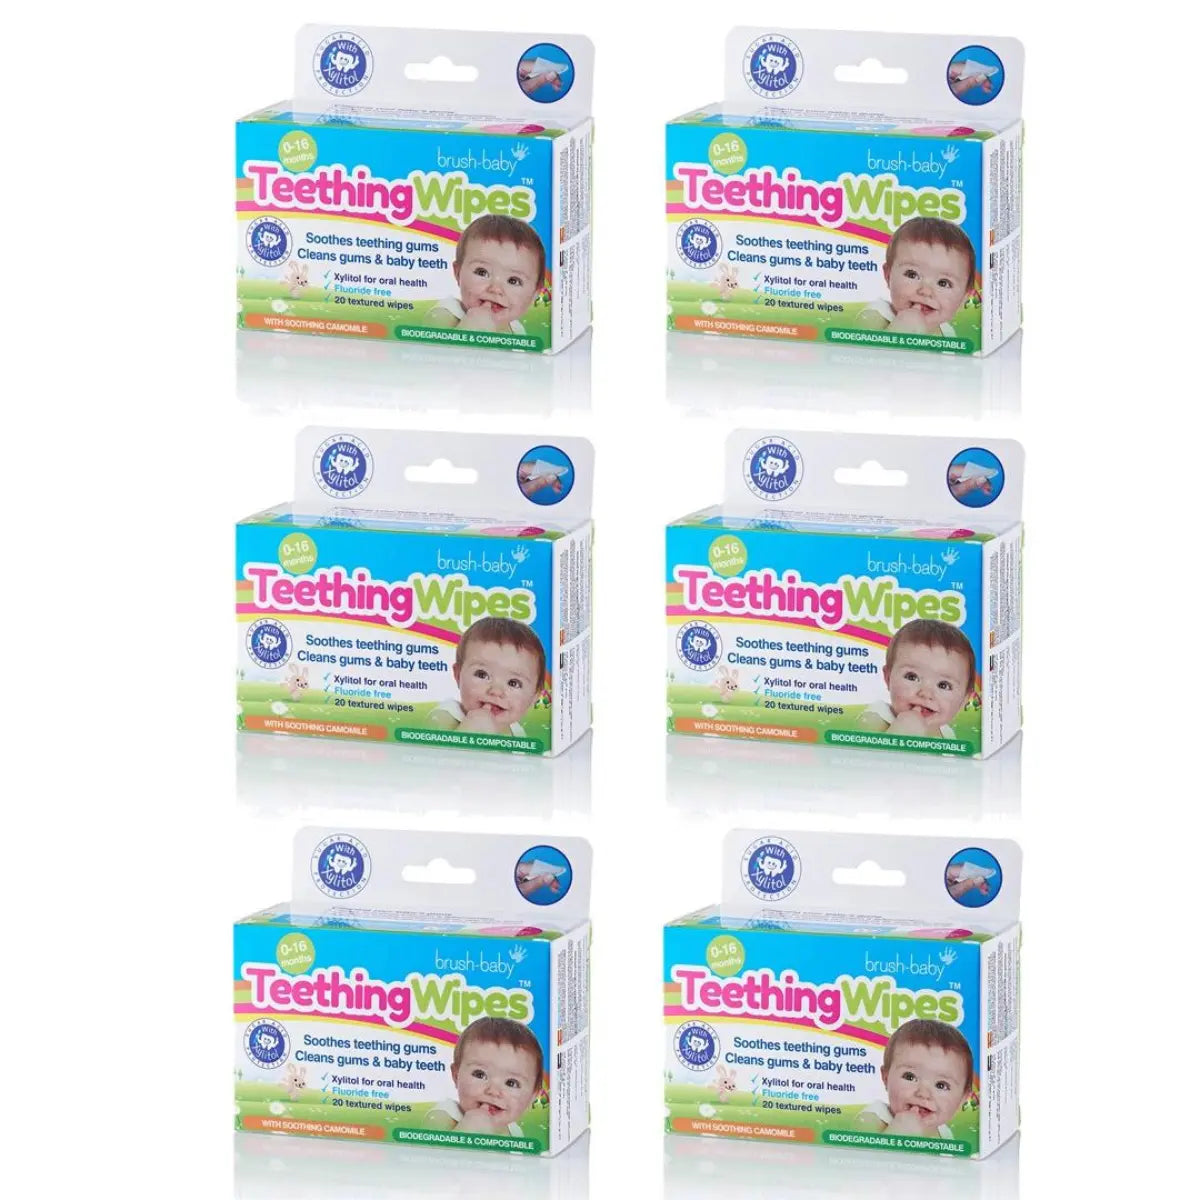 box of finger sleeve wrapped biodegradable & compostable baby teething wipes | teething baby gum wipes